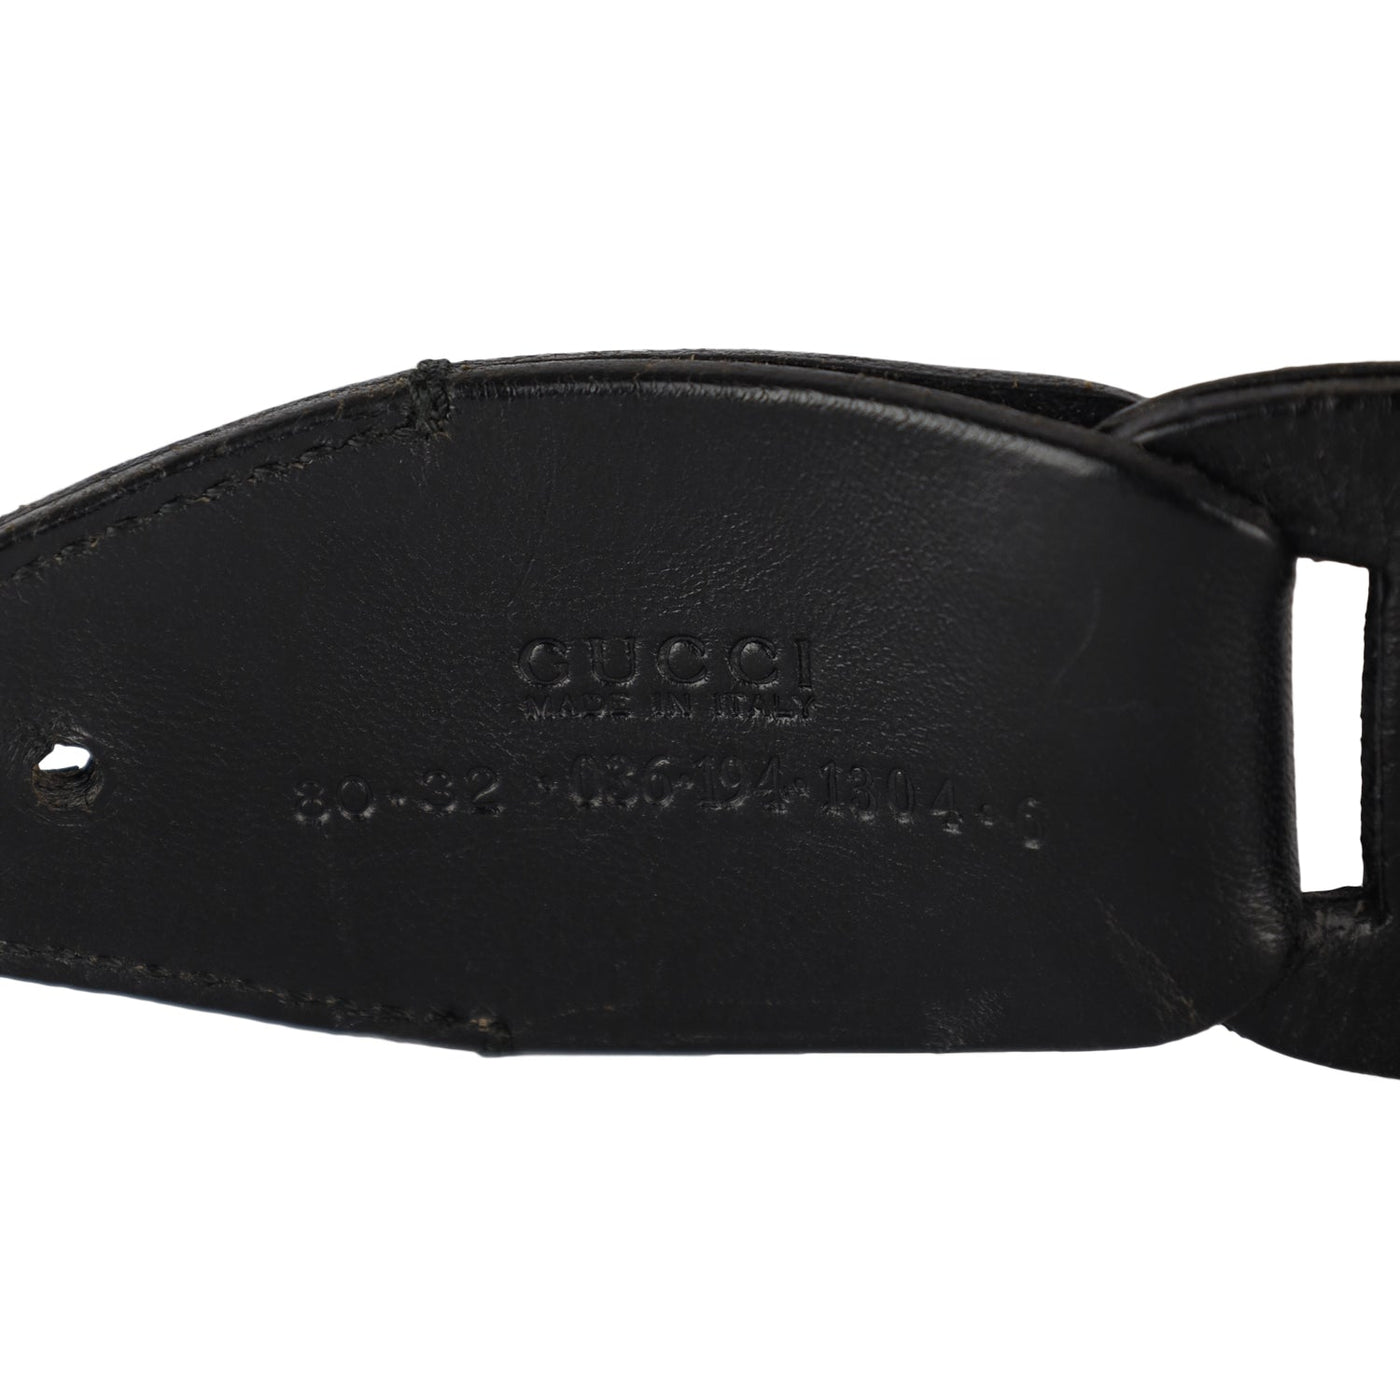 Gucci black woven leather belt pre-owned